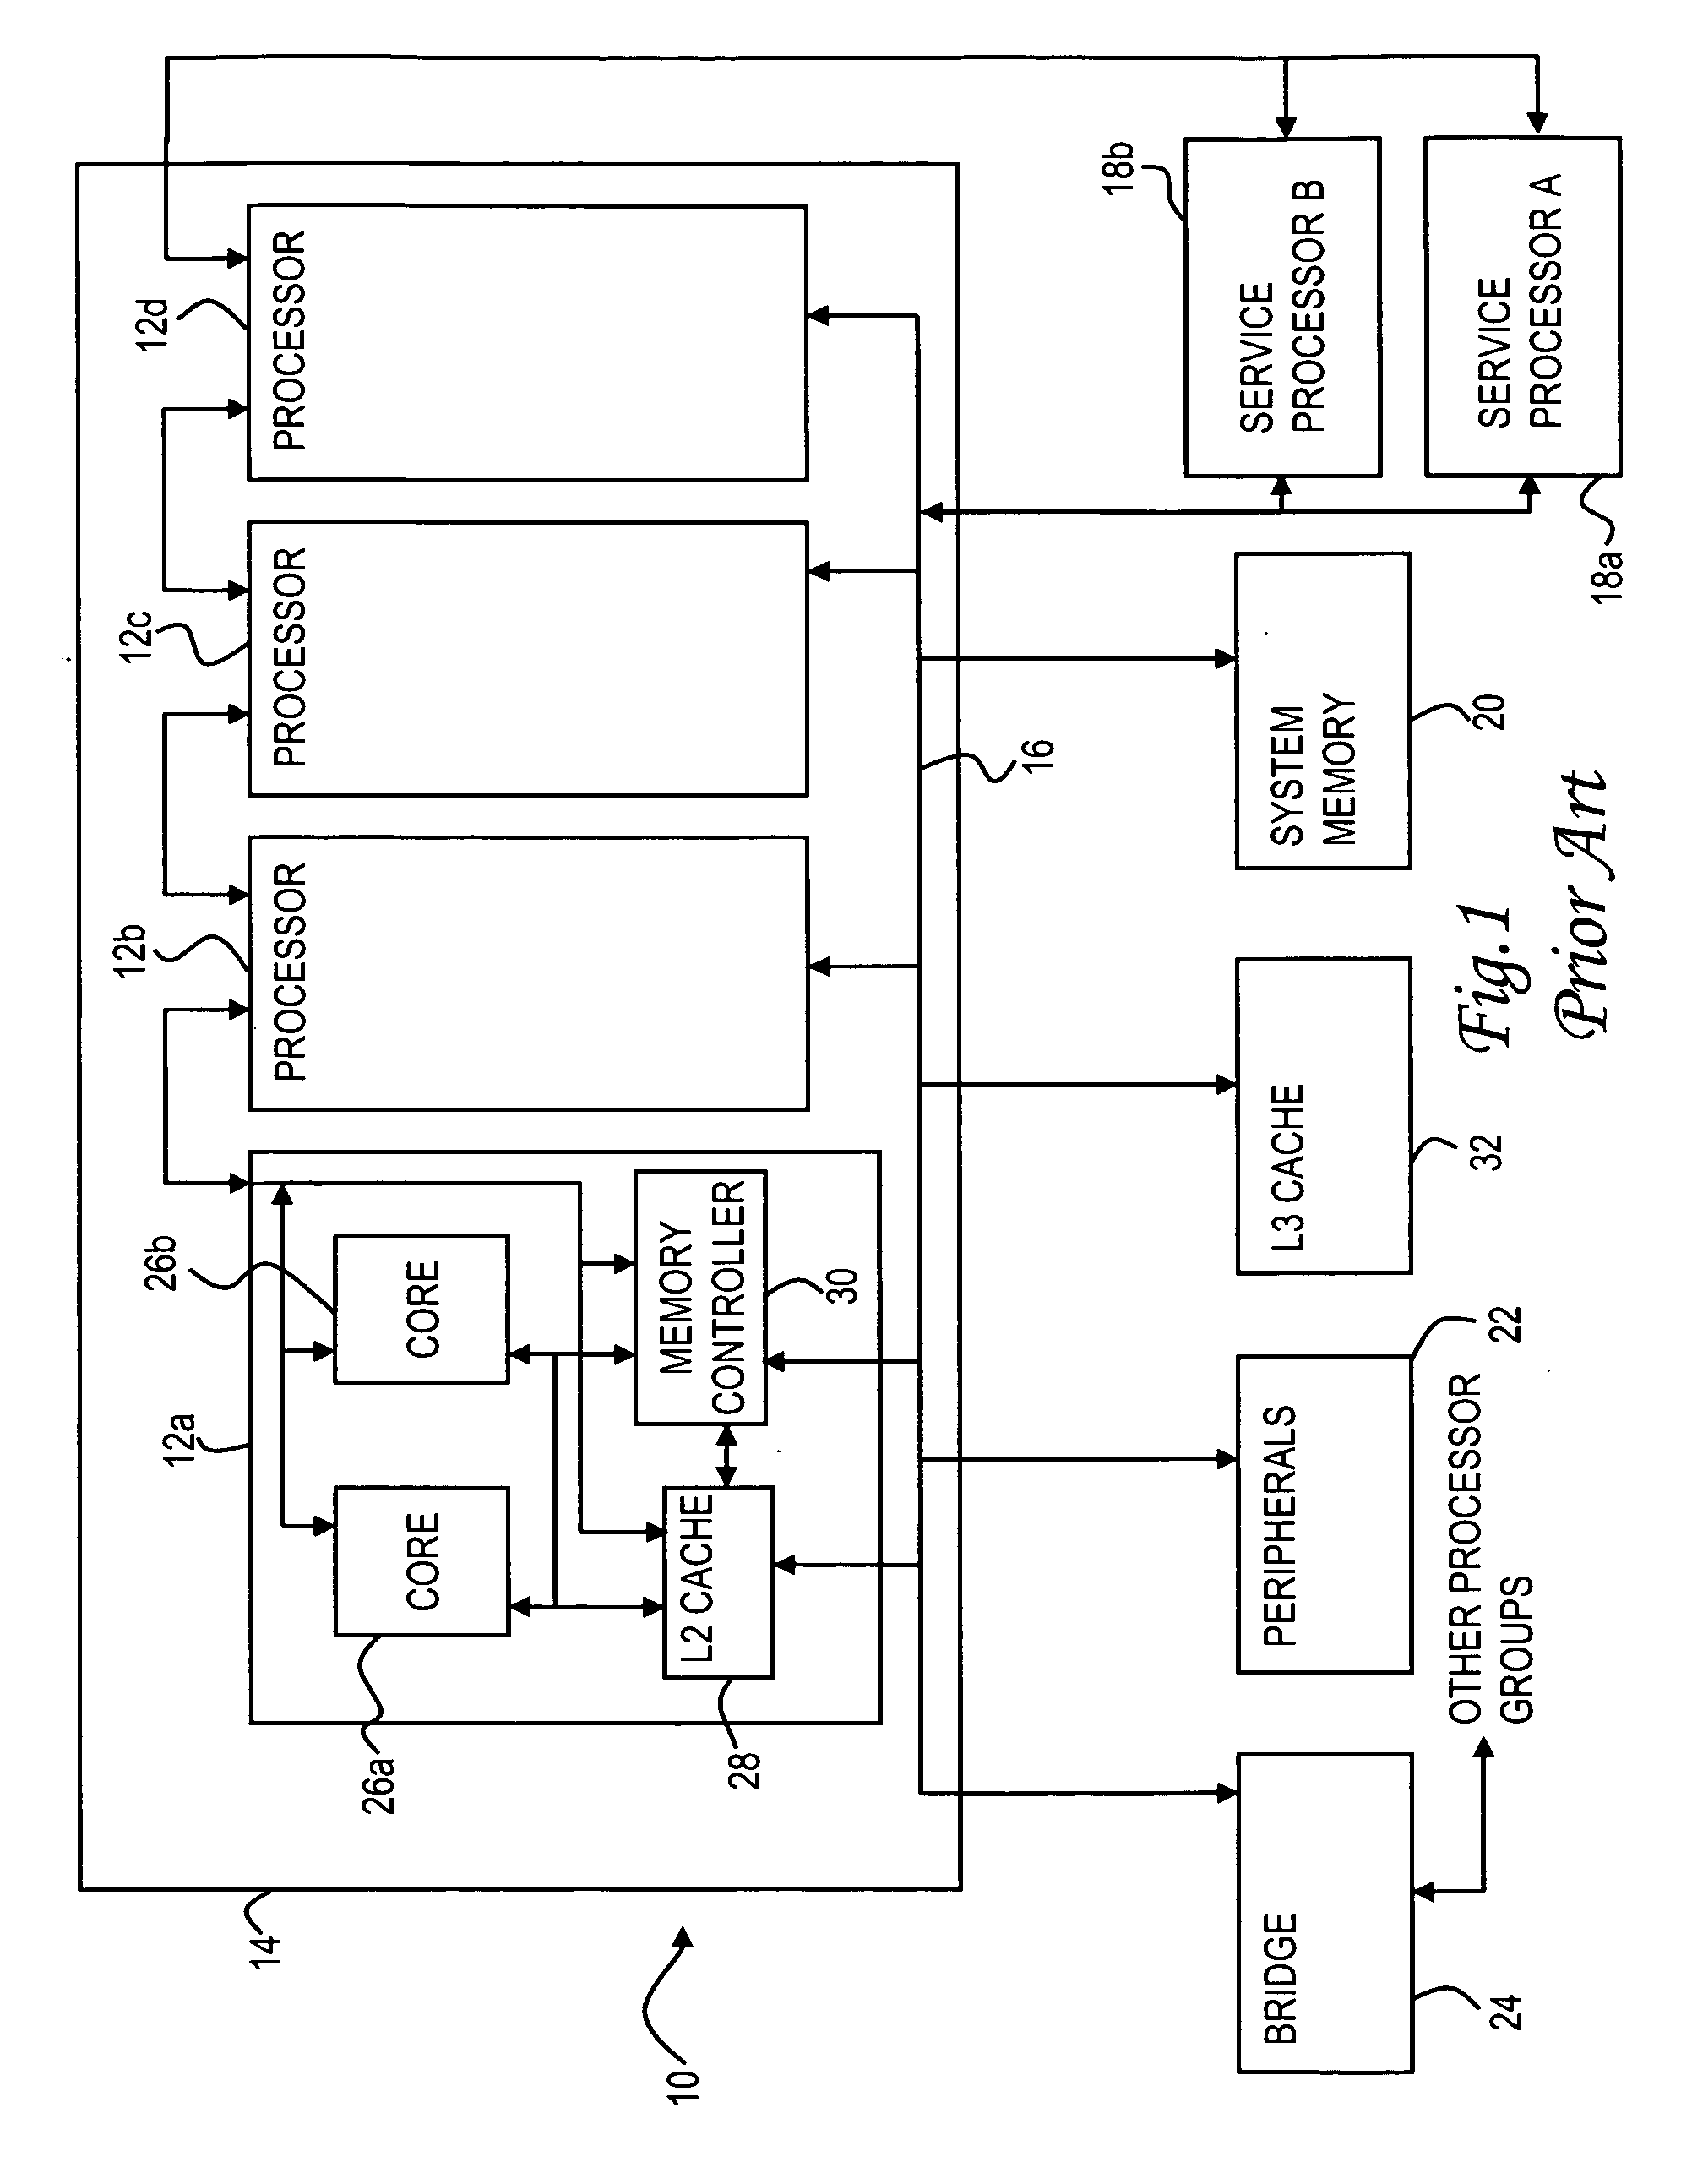 Method for cache correction using functional tests translated to fuse repair